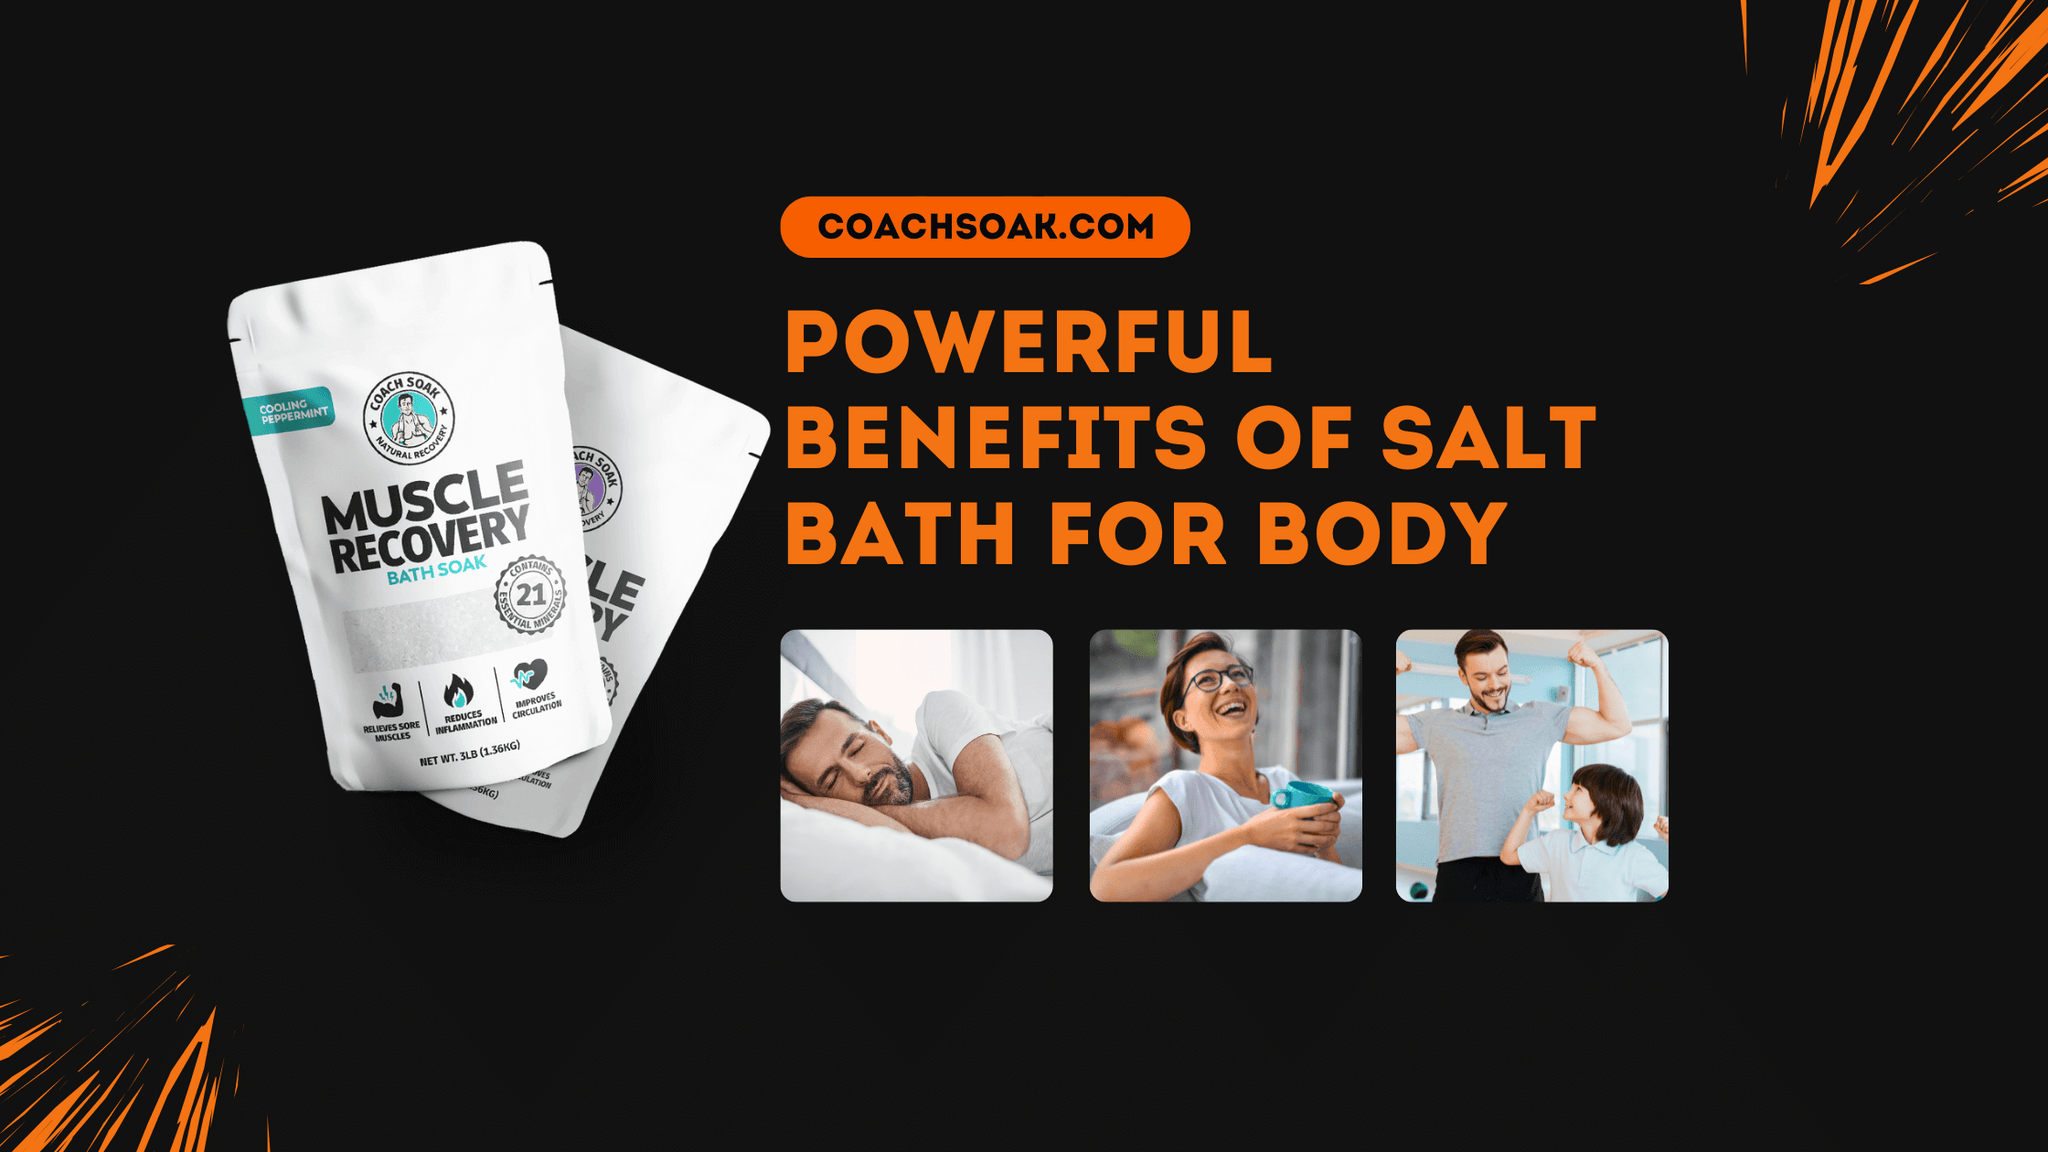 11 Powerful Benefits of Salt Bath for Body and How to Use Them